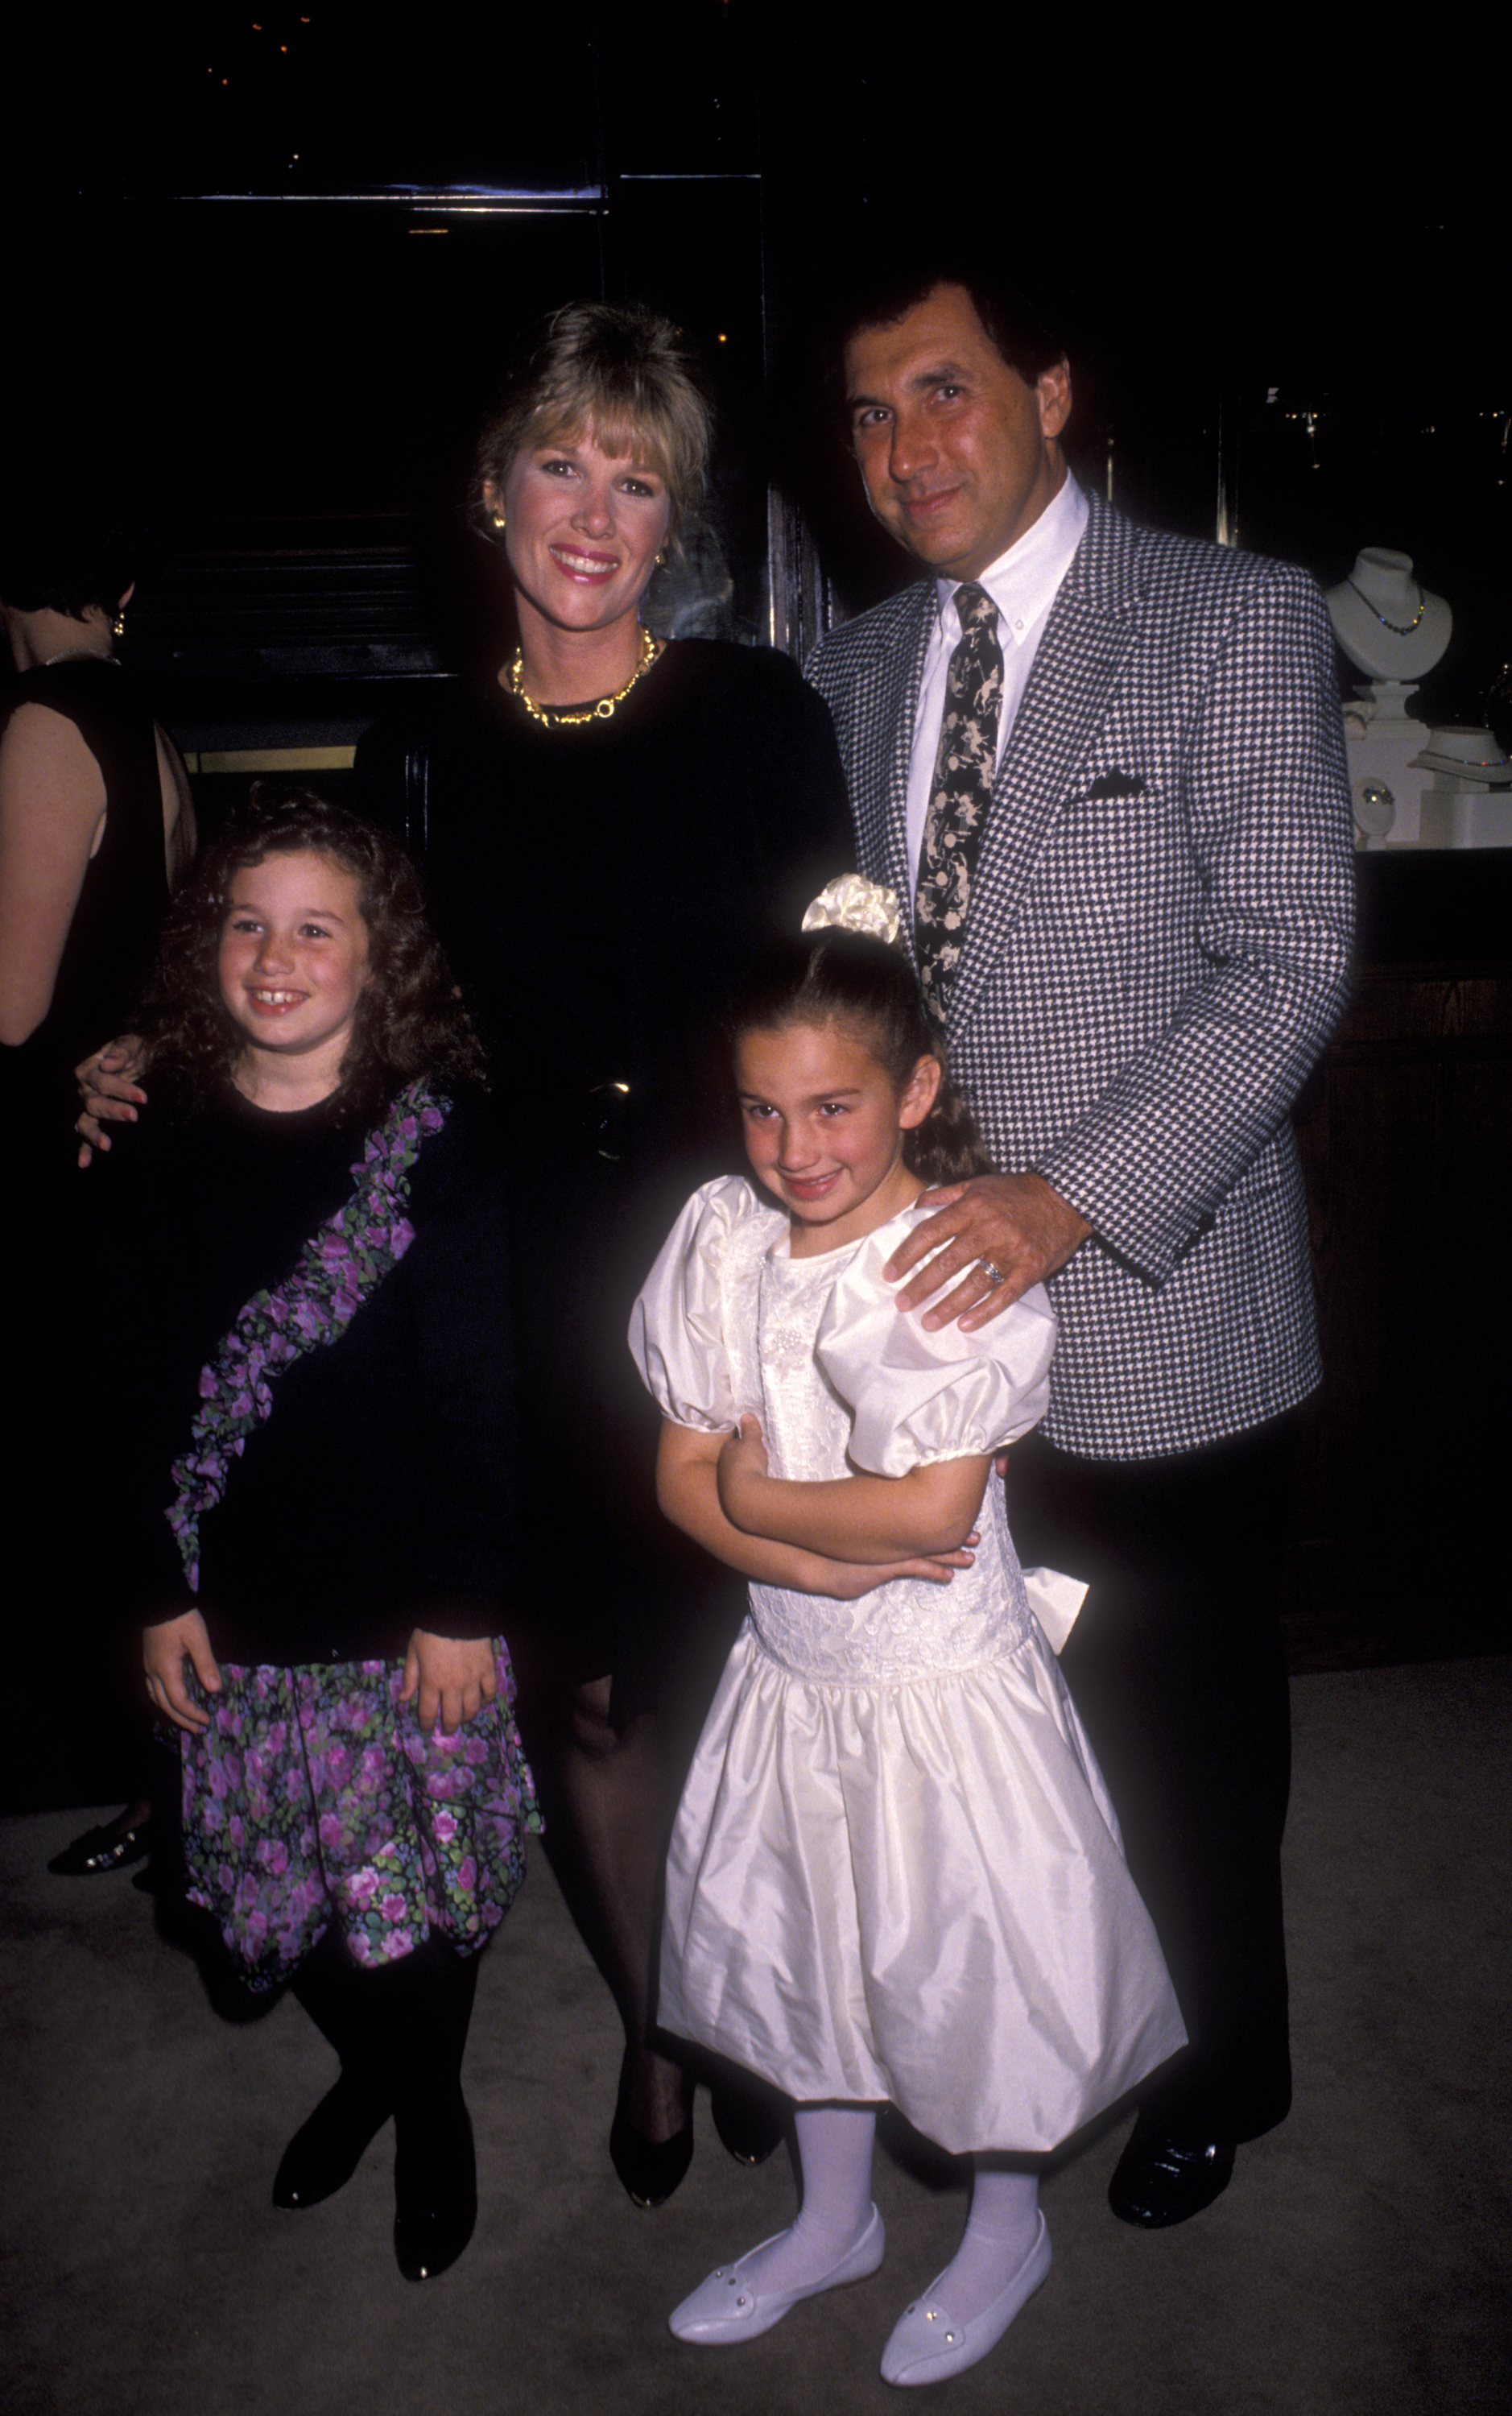 Joan Lunden, Michael Krauss and daughters Lindsay and Jamie attend Champagne At Chartier Dinner Gala at the Cartier Building in New York City on October 29, 1990. | Source: Getty Images